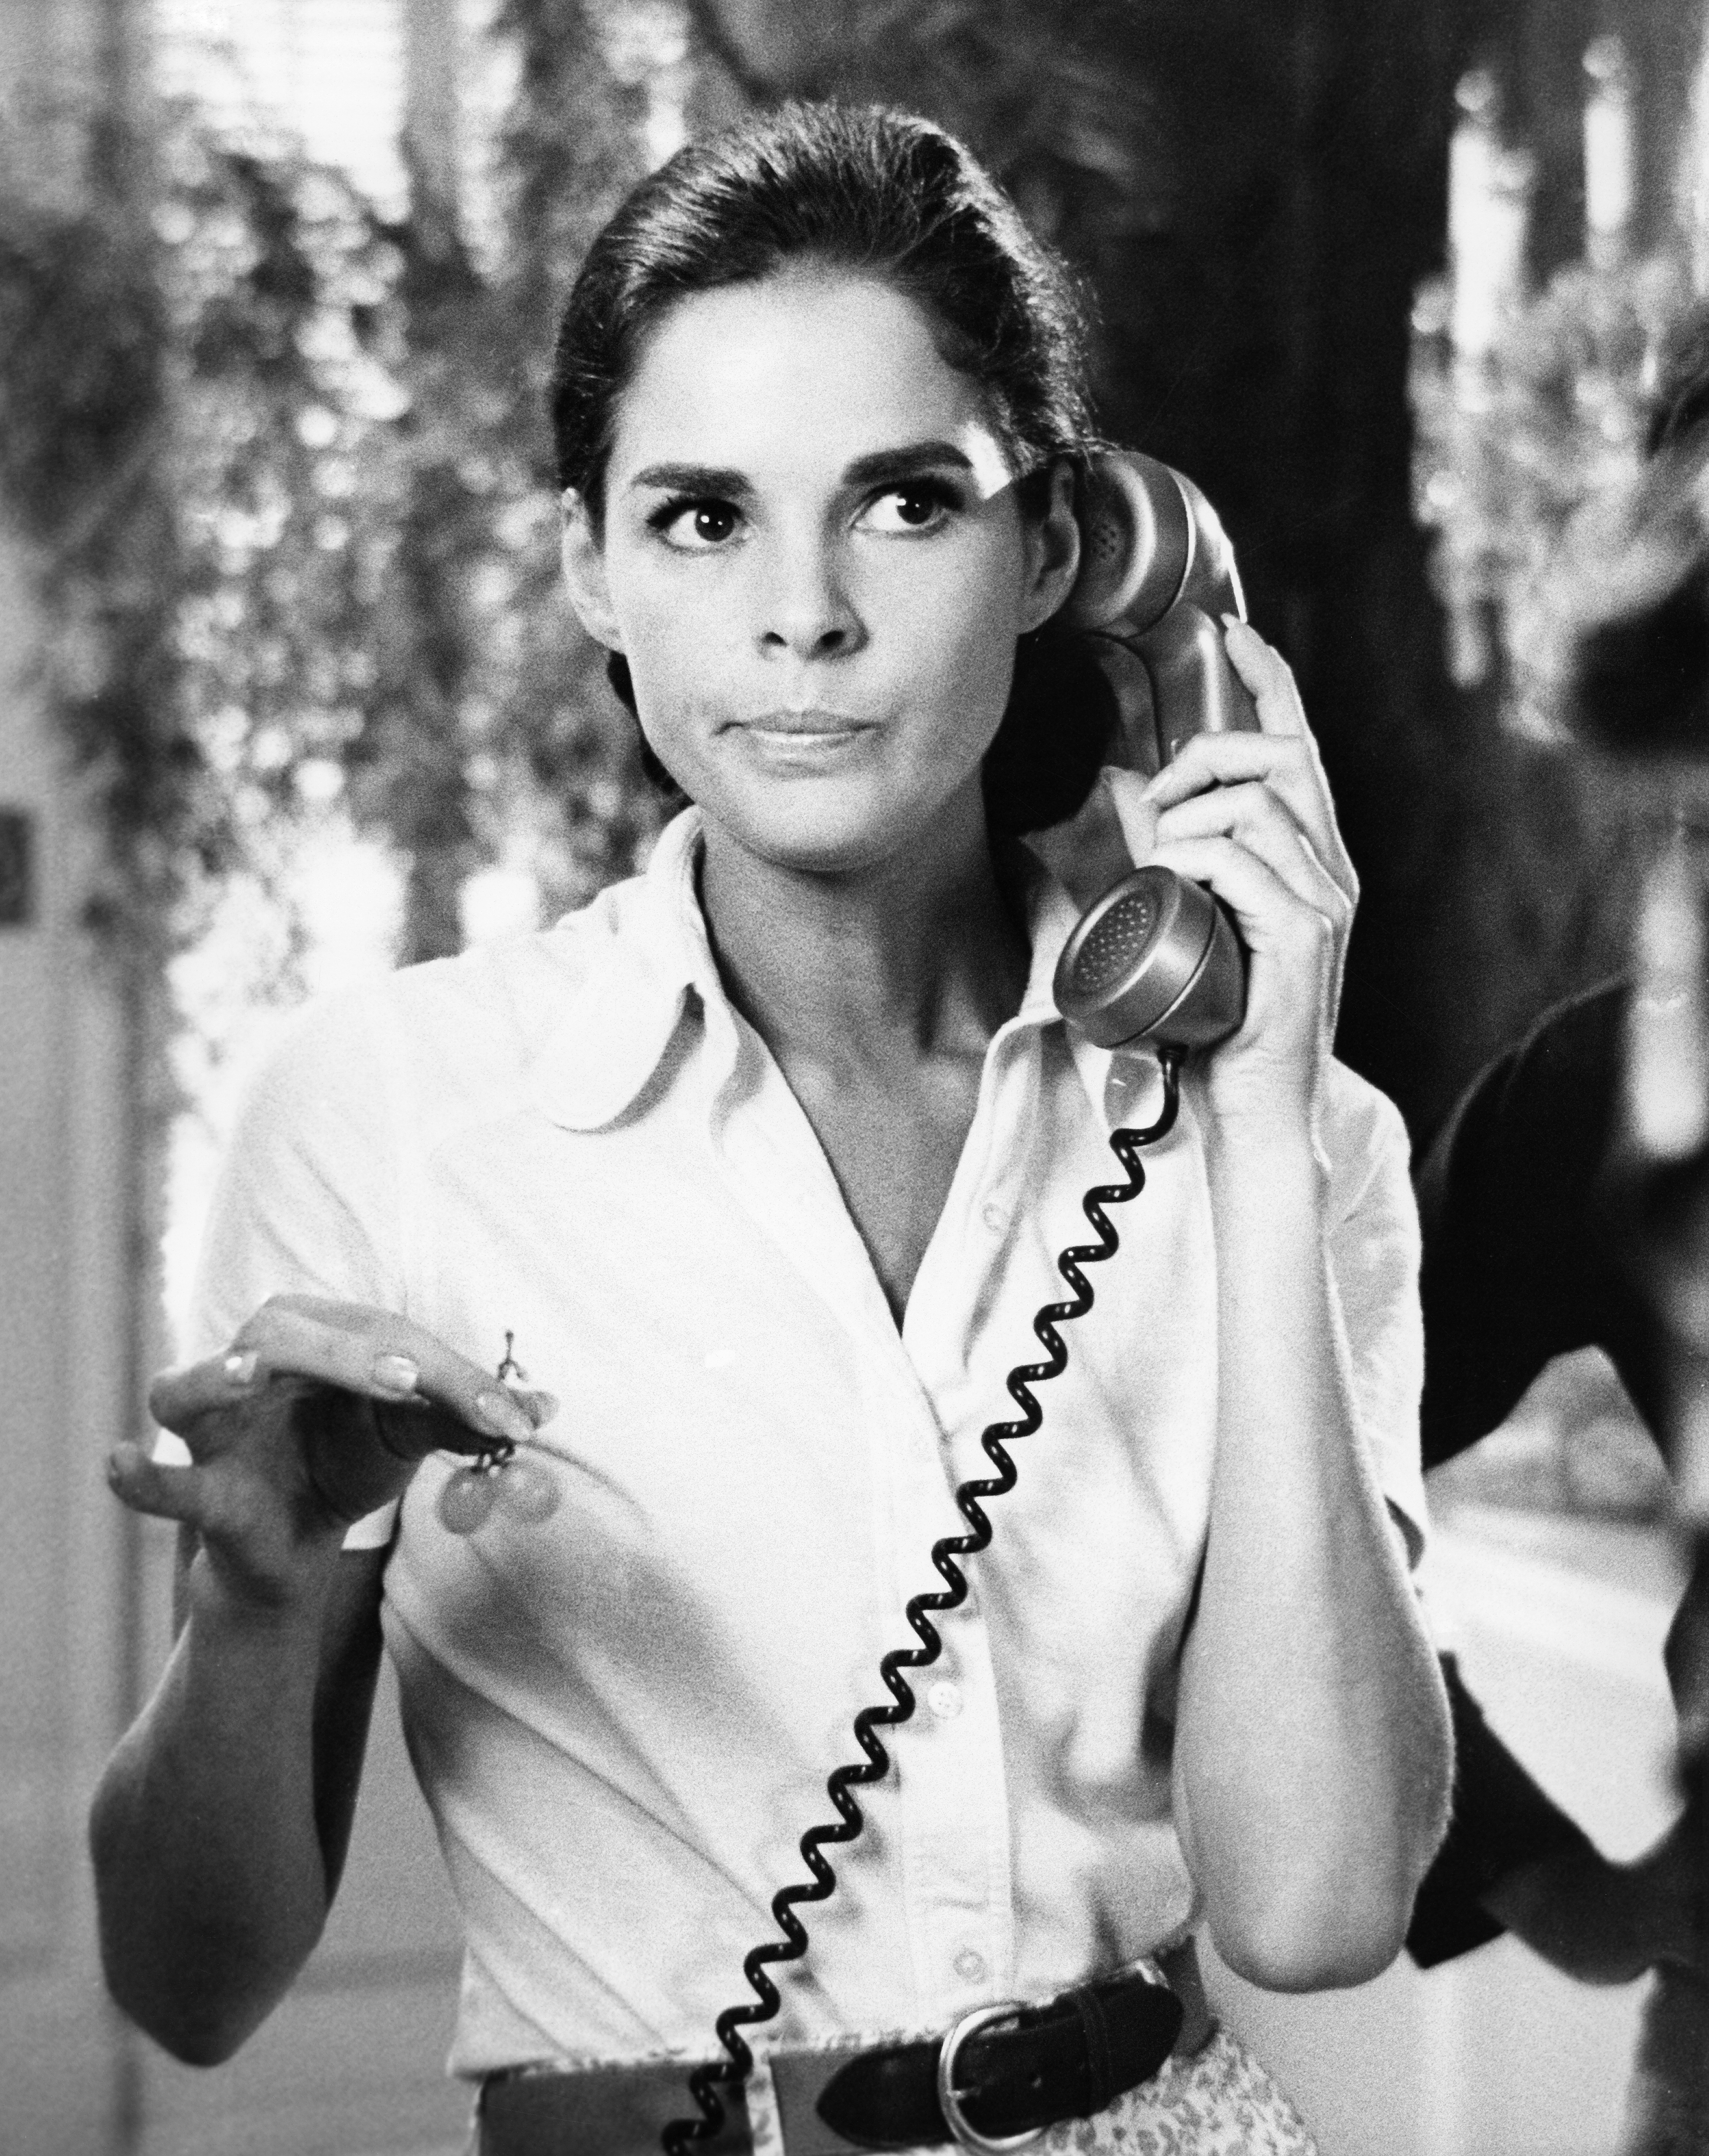 Ali MacGraw on the set of "Goodbye, Columbus" in 1969 | Source: Getty Images